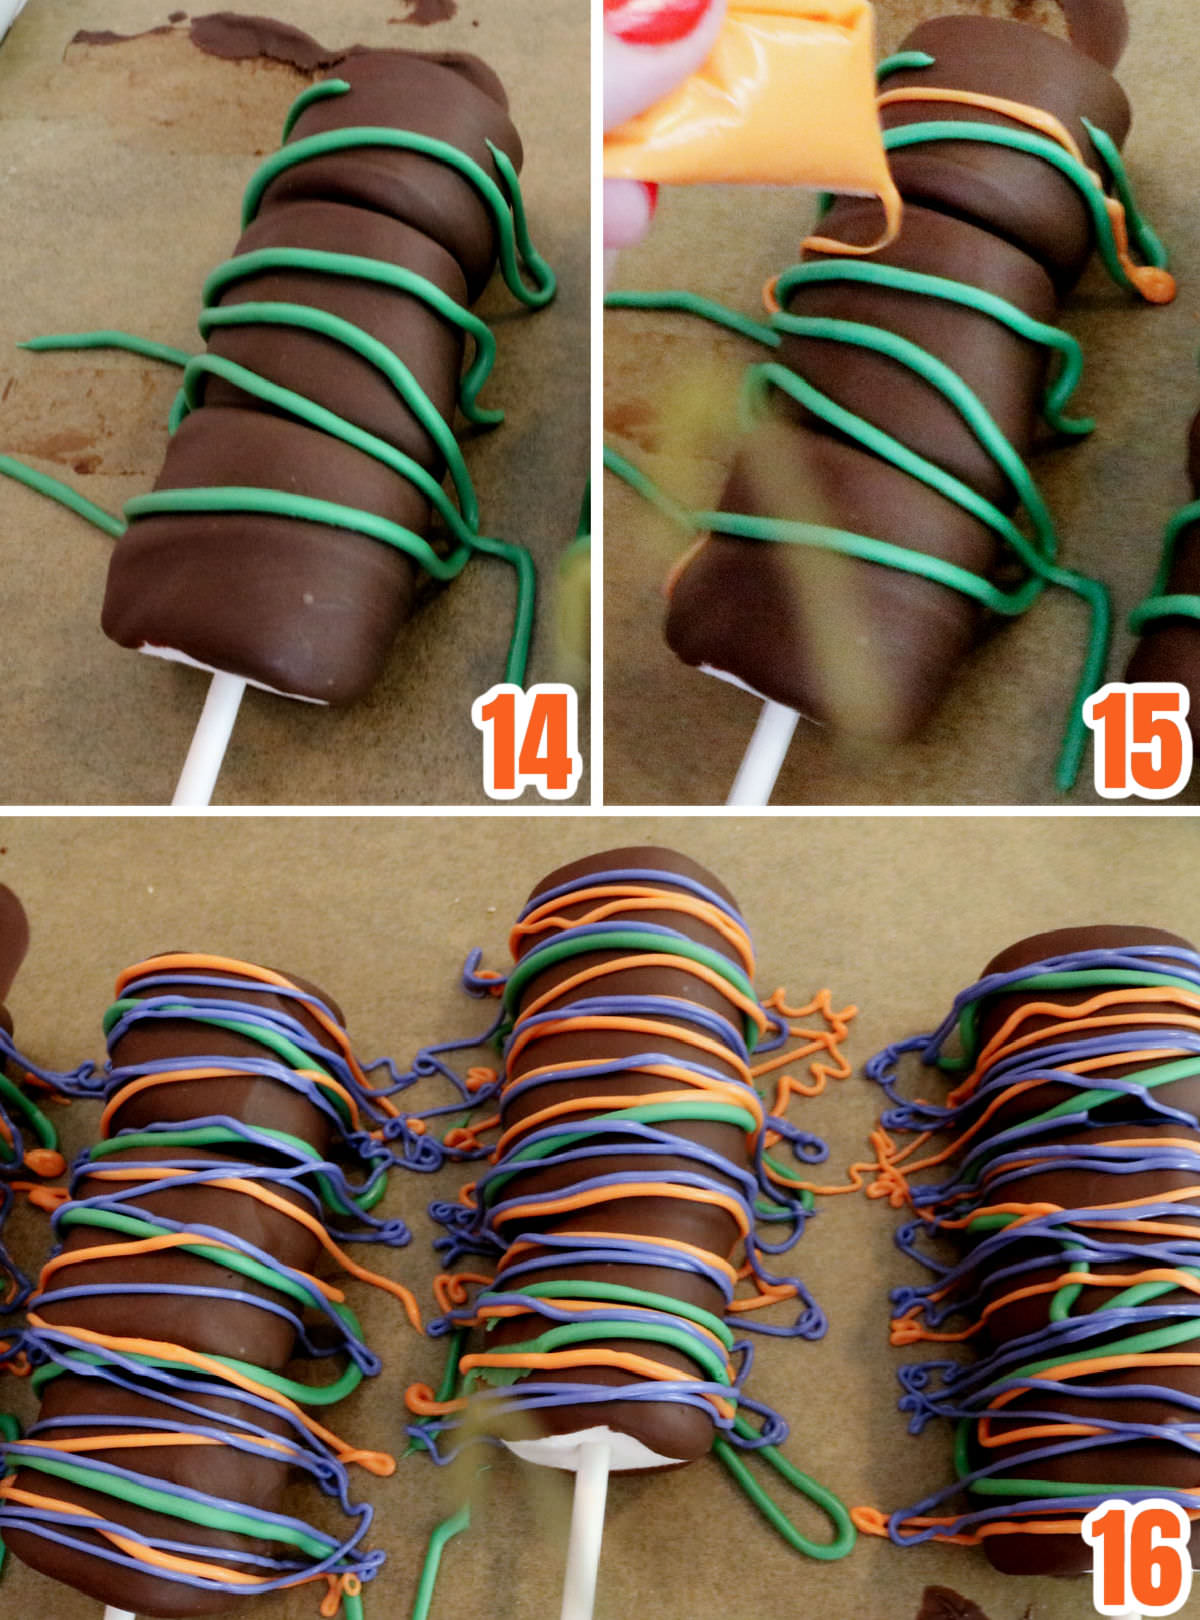 Collage image showing how to decorate the Marshmallow Pops with colored candy melts.